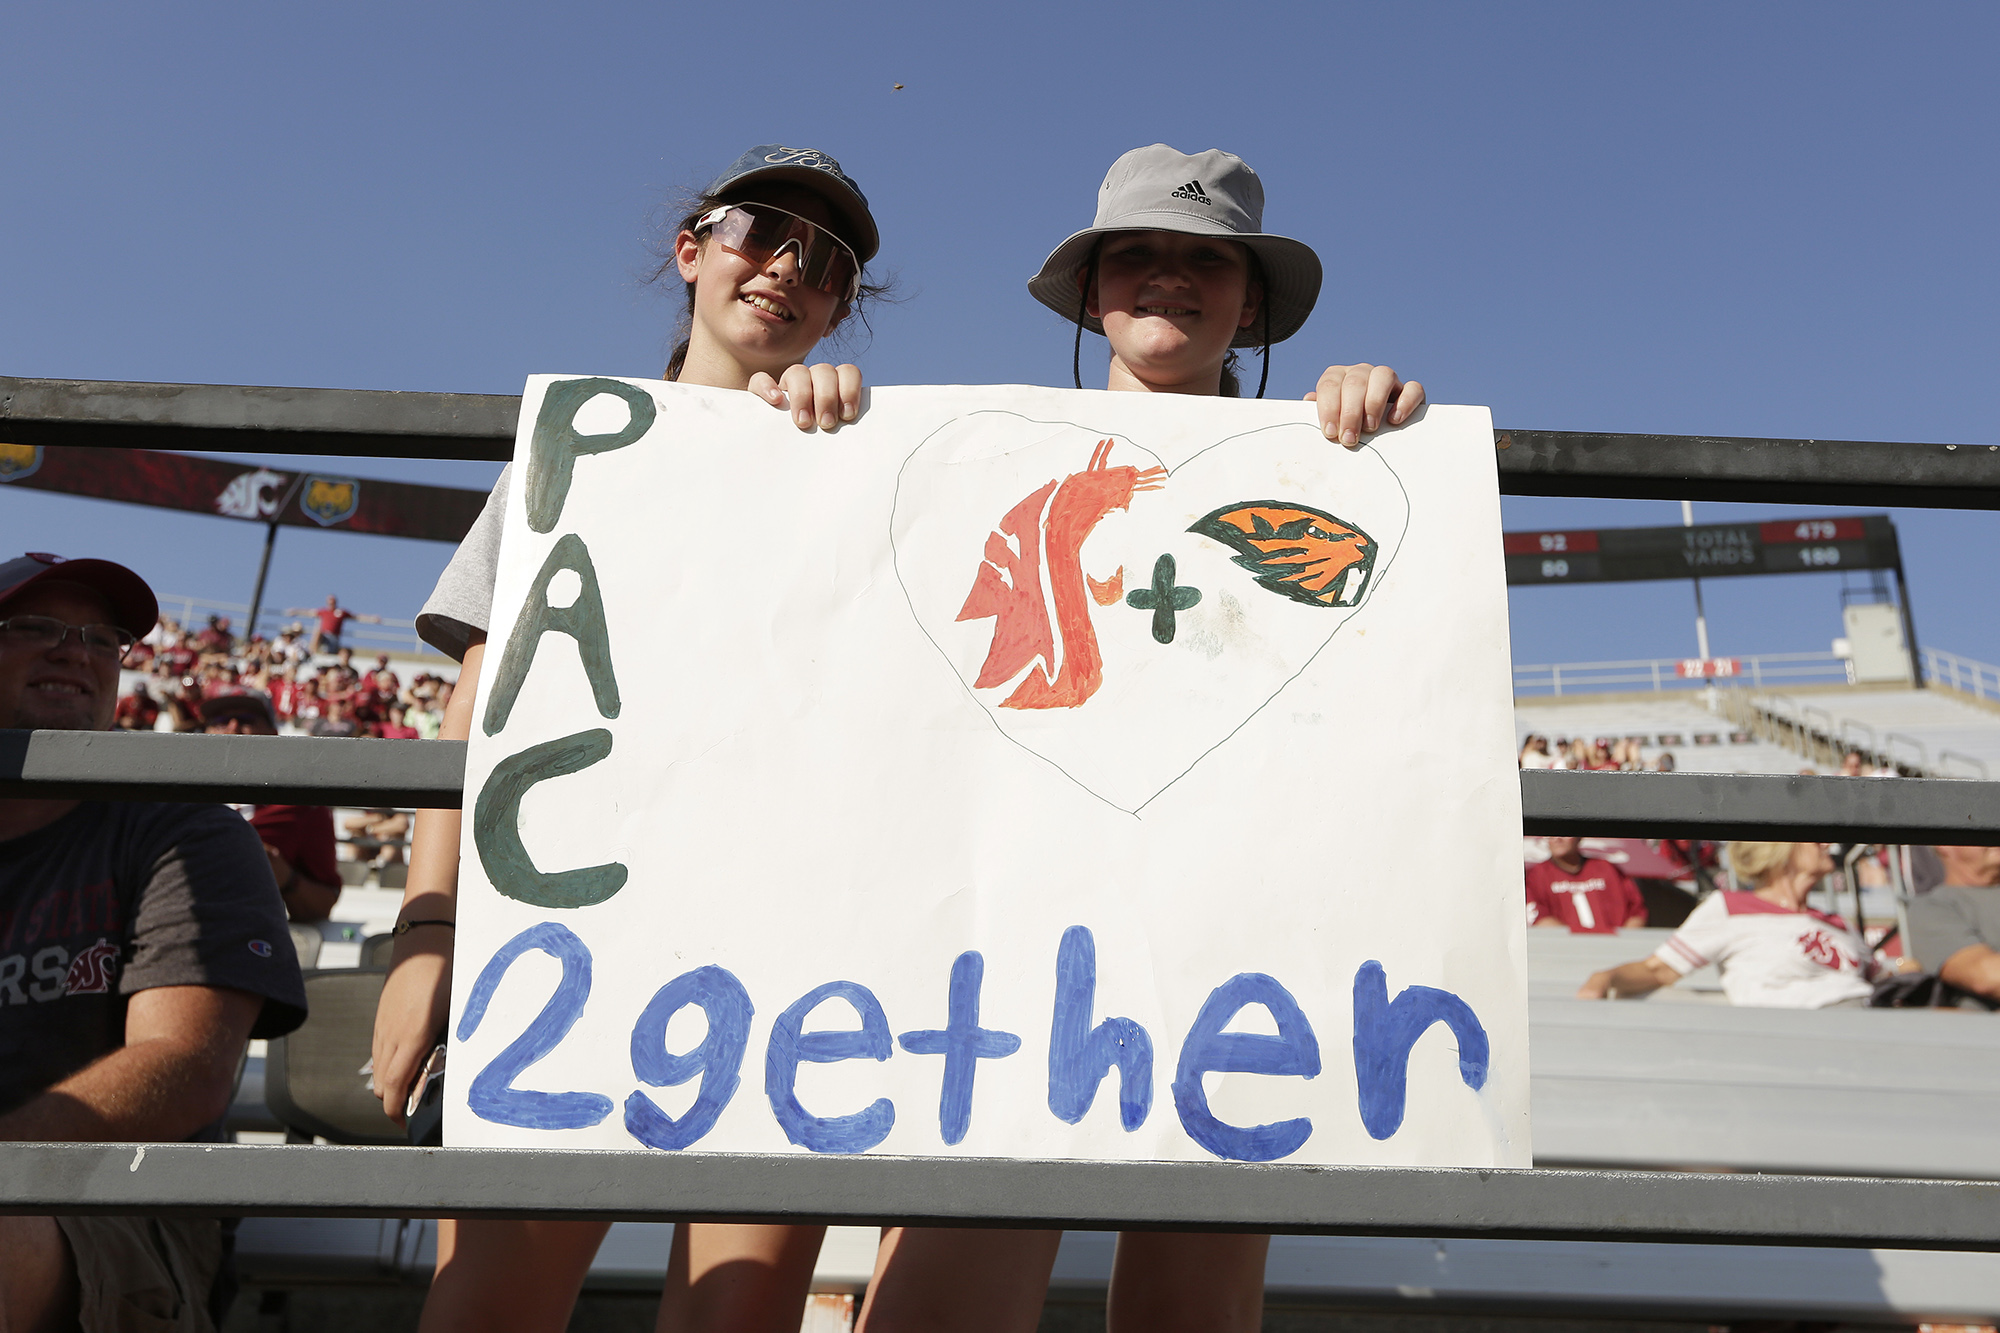 12-year-olds Izzy Aberill, left, and Josie Boyd hold a sign about Washington State and Oregon State being the only two schools left in the Pac-12 after the 2023-2024 academic year after the other schools in the conference announced plans to leave, during the second half of an NCAA college football game between Washington State and Northern Colorado, Saturday, Sept. 16, 2023, in Pullman, Wash. Washington State won 64-21.